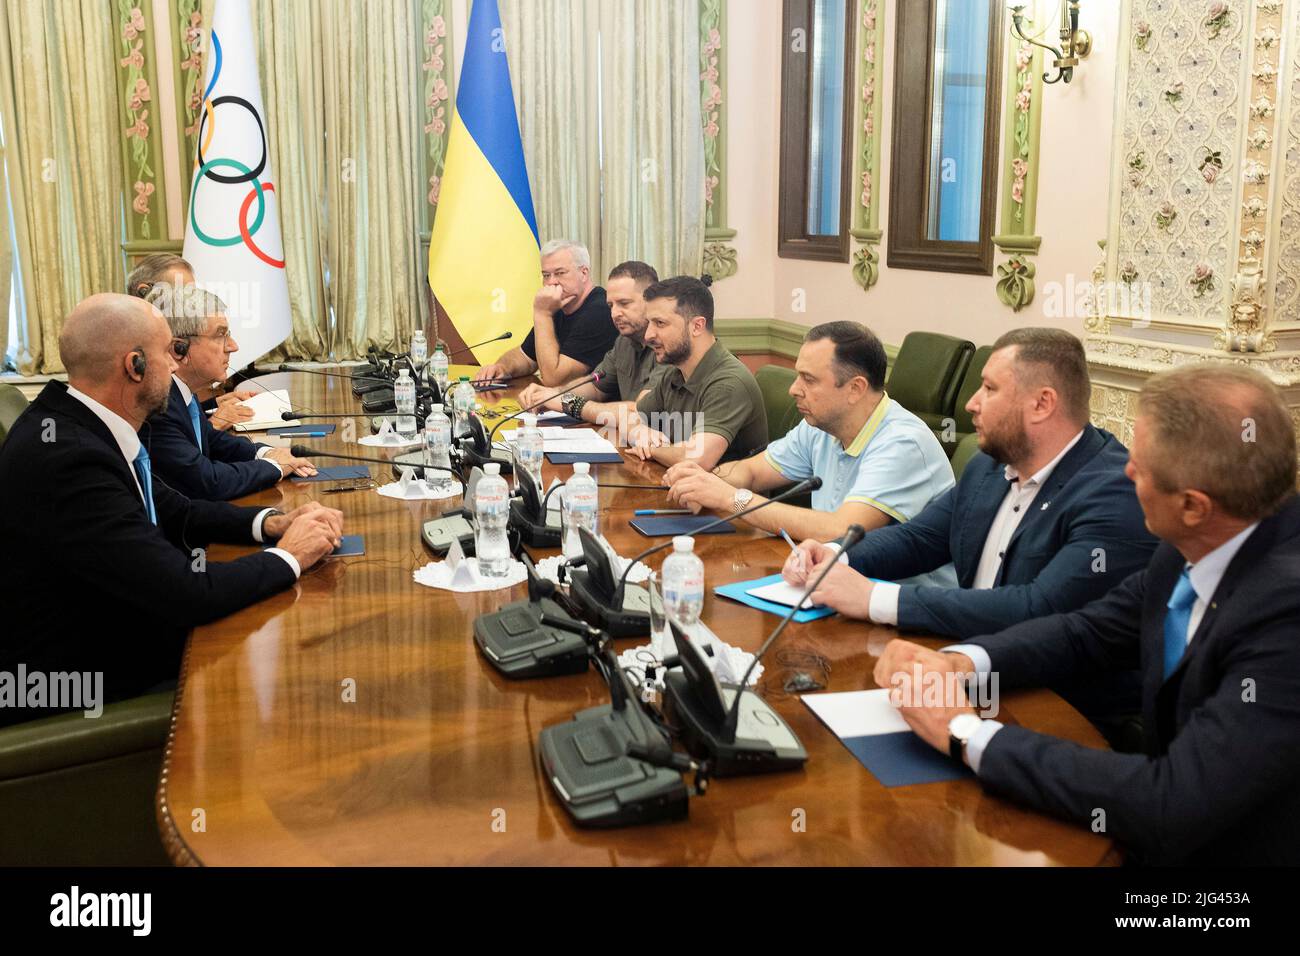 Kyiv, Ukraine. 03 July, 2022. Ukrainian President Volodymyr Zelenskyy, right, and delegations during a face-to-face bilateral meeting with International Olympic Committee President Thomas Bach, left, at the Mariinskyi Palace, July 3, 2022 in Kyiv, Ukraine.  Credit: Ukraine Presidency/Ukrainian Presidential Press Office/Alamy Live News Stock Photo